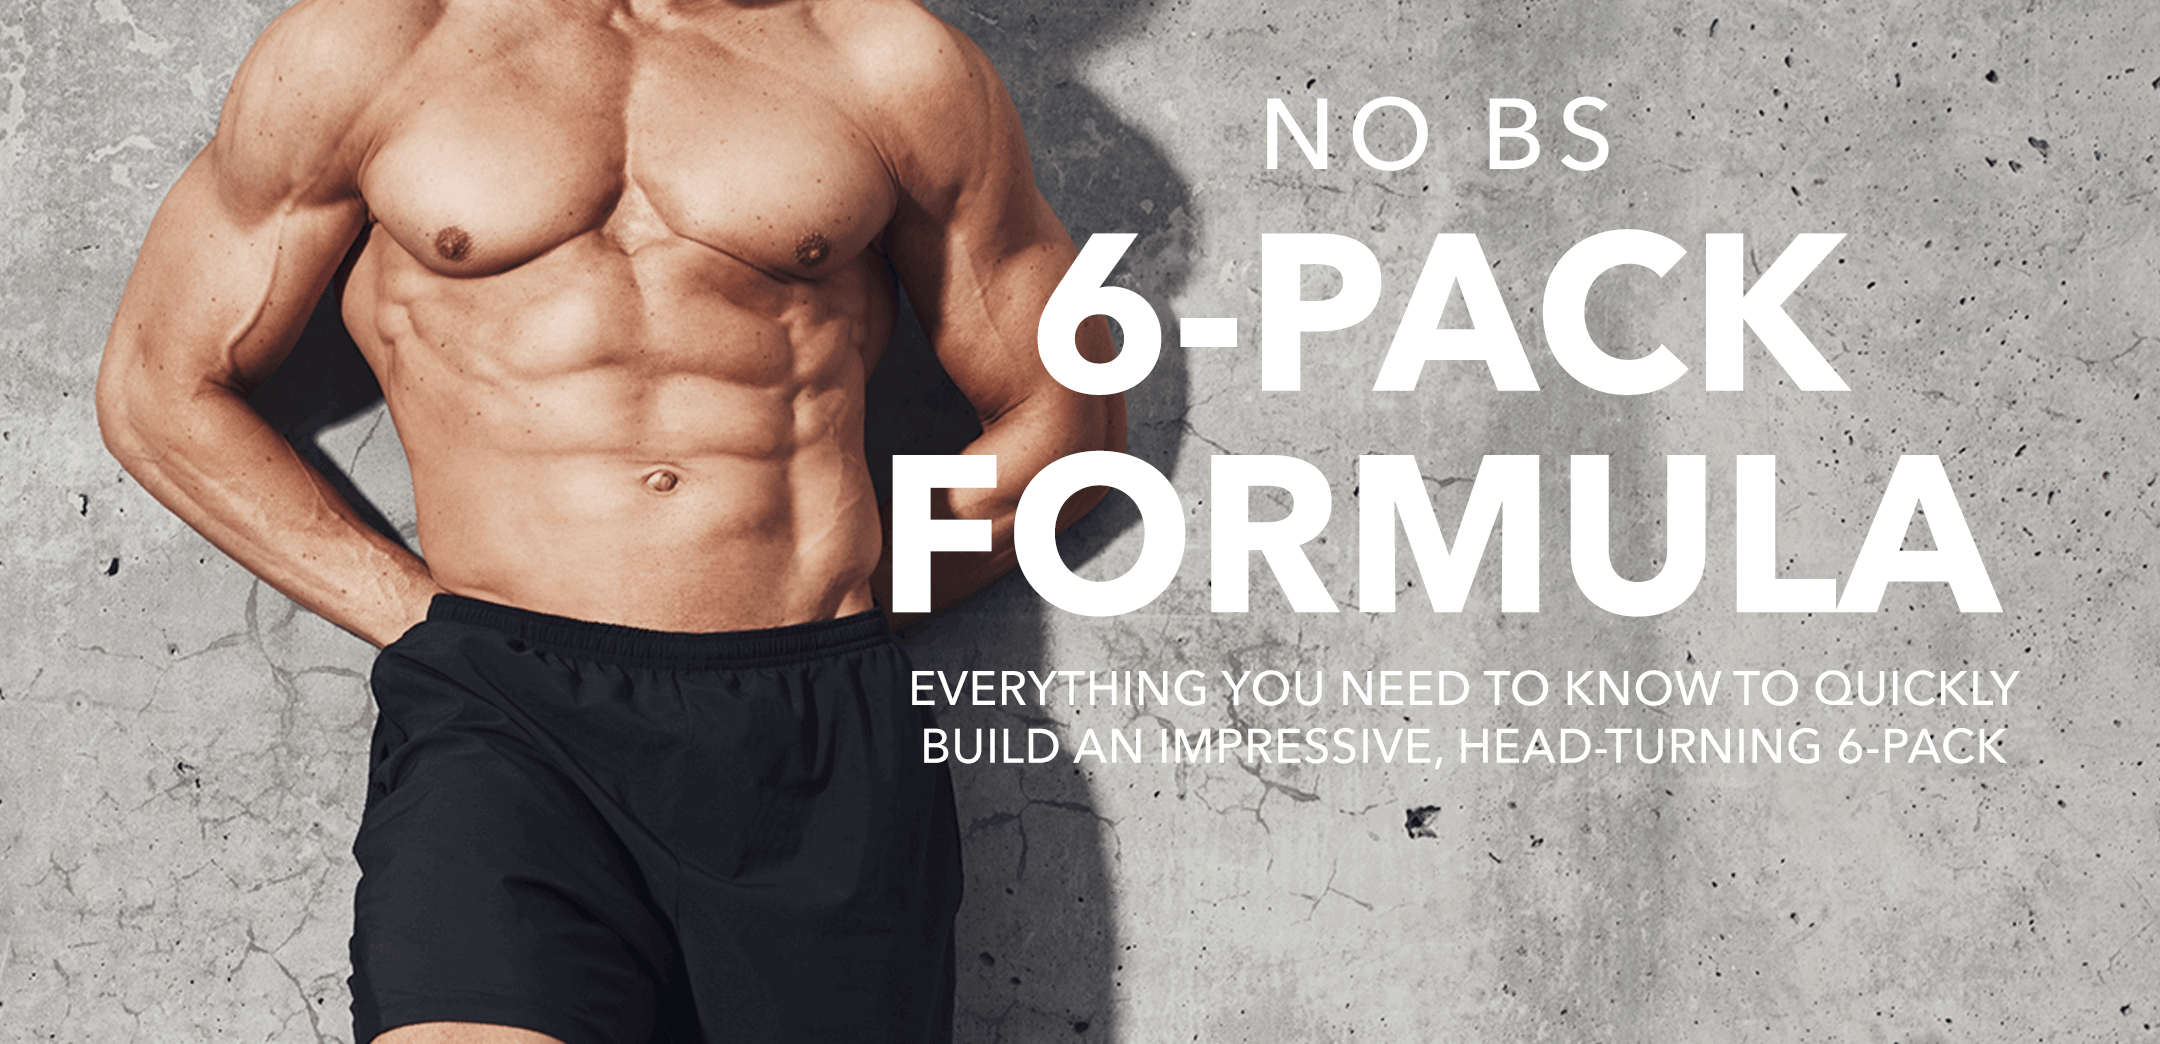 No BS 6-Pack Abs  MAPS Fitness Products